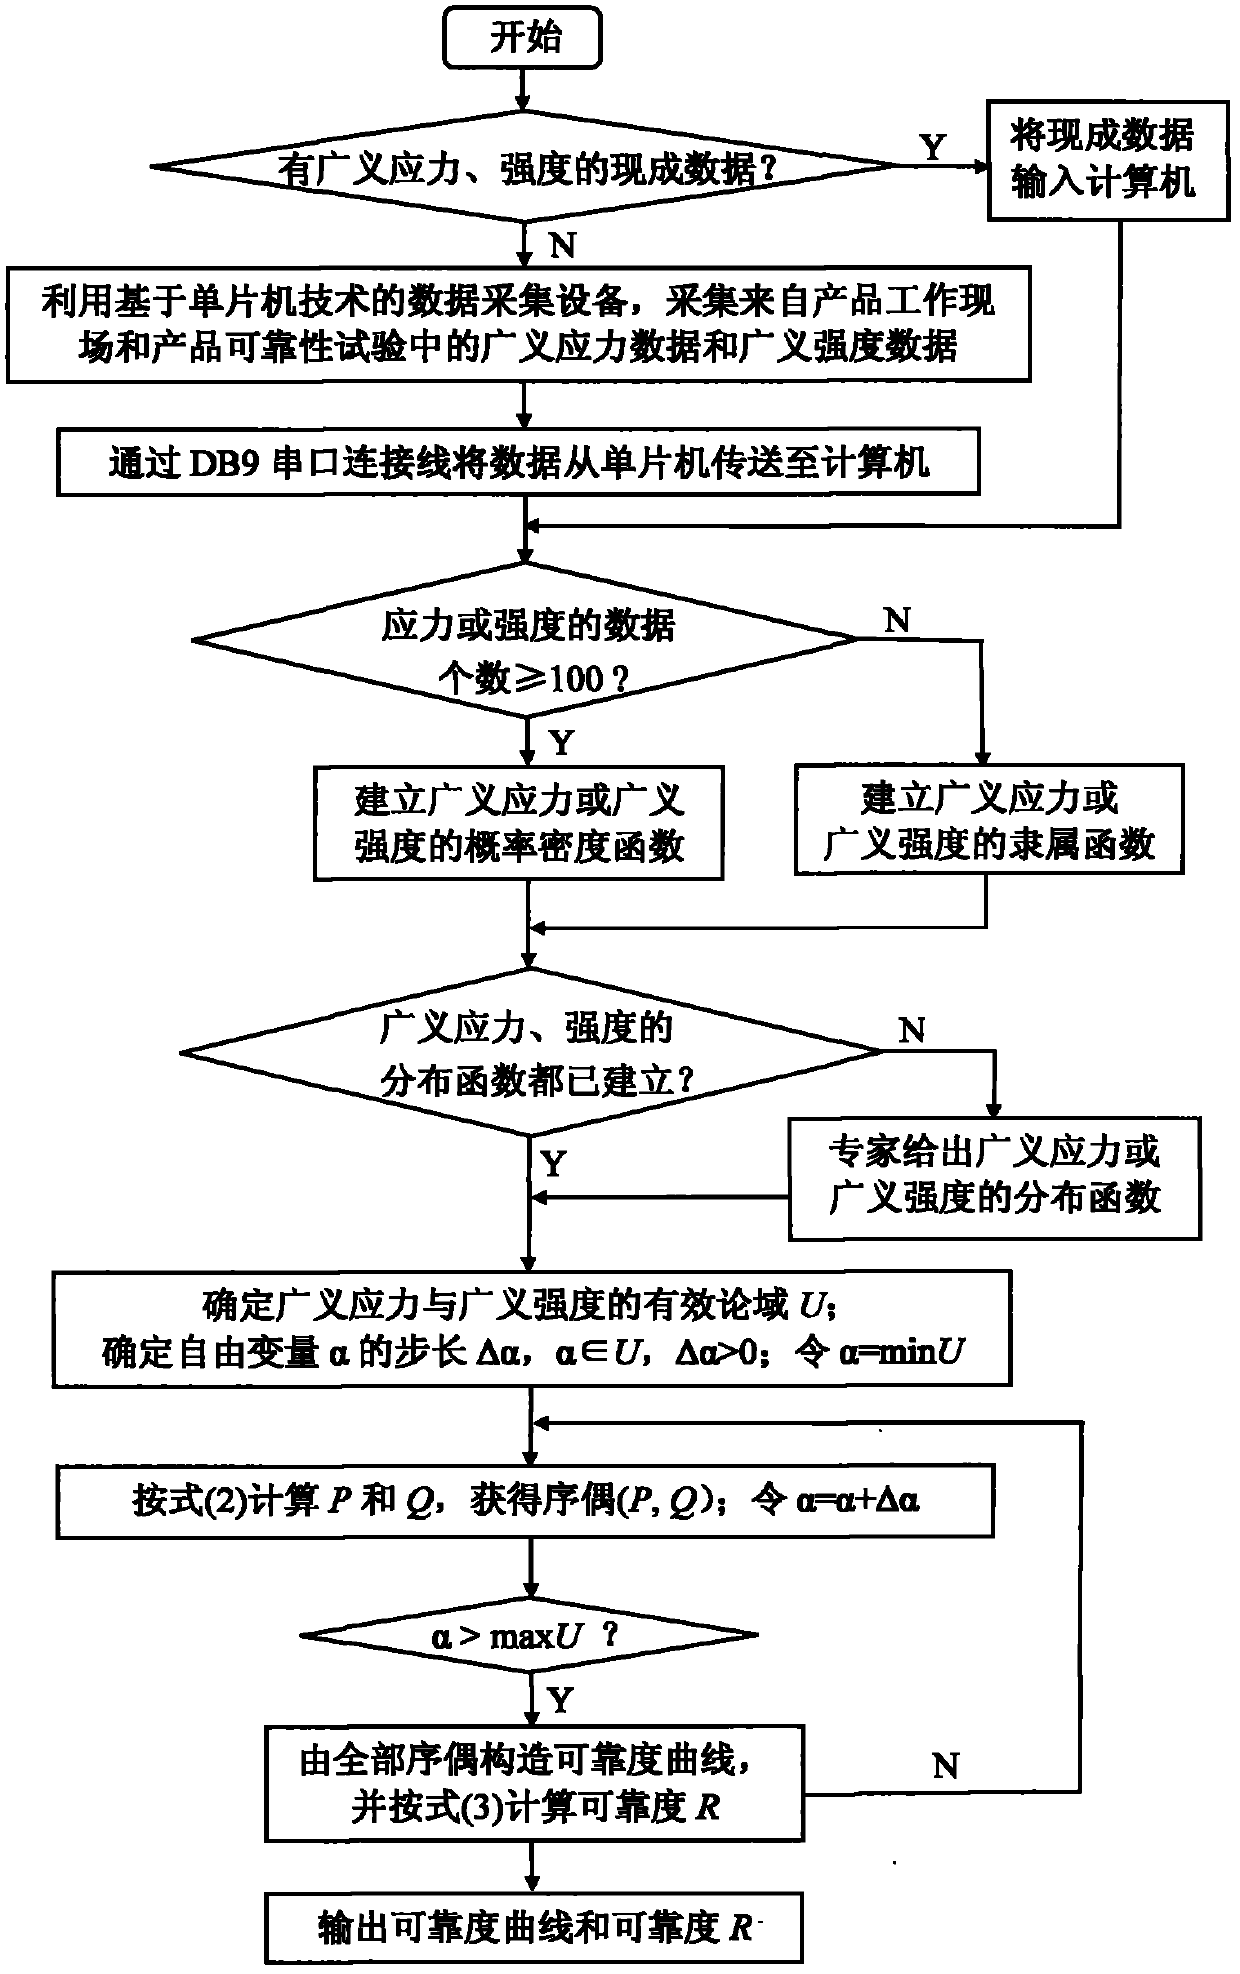 Reliability measurement method for mechanical and electrical product